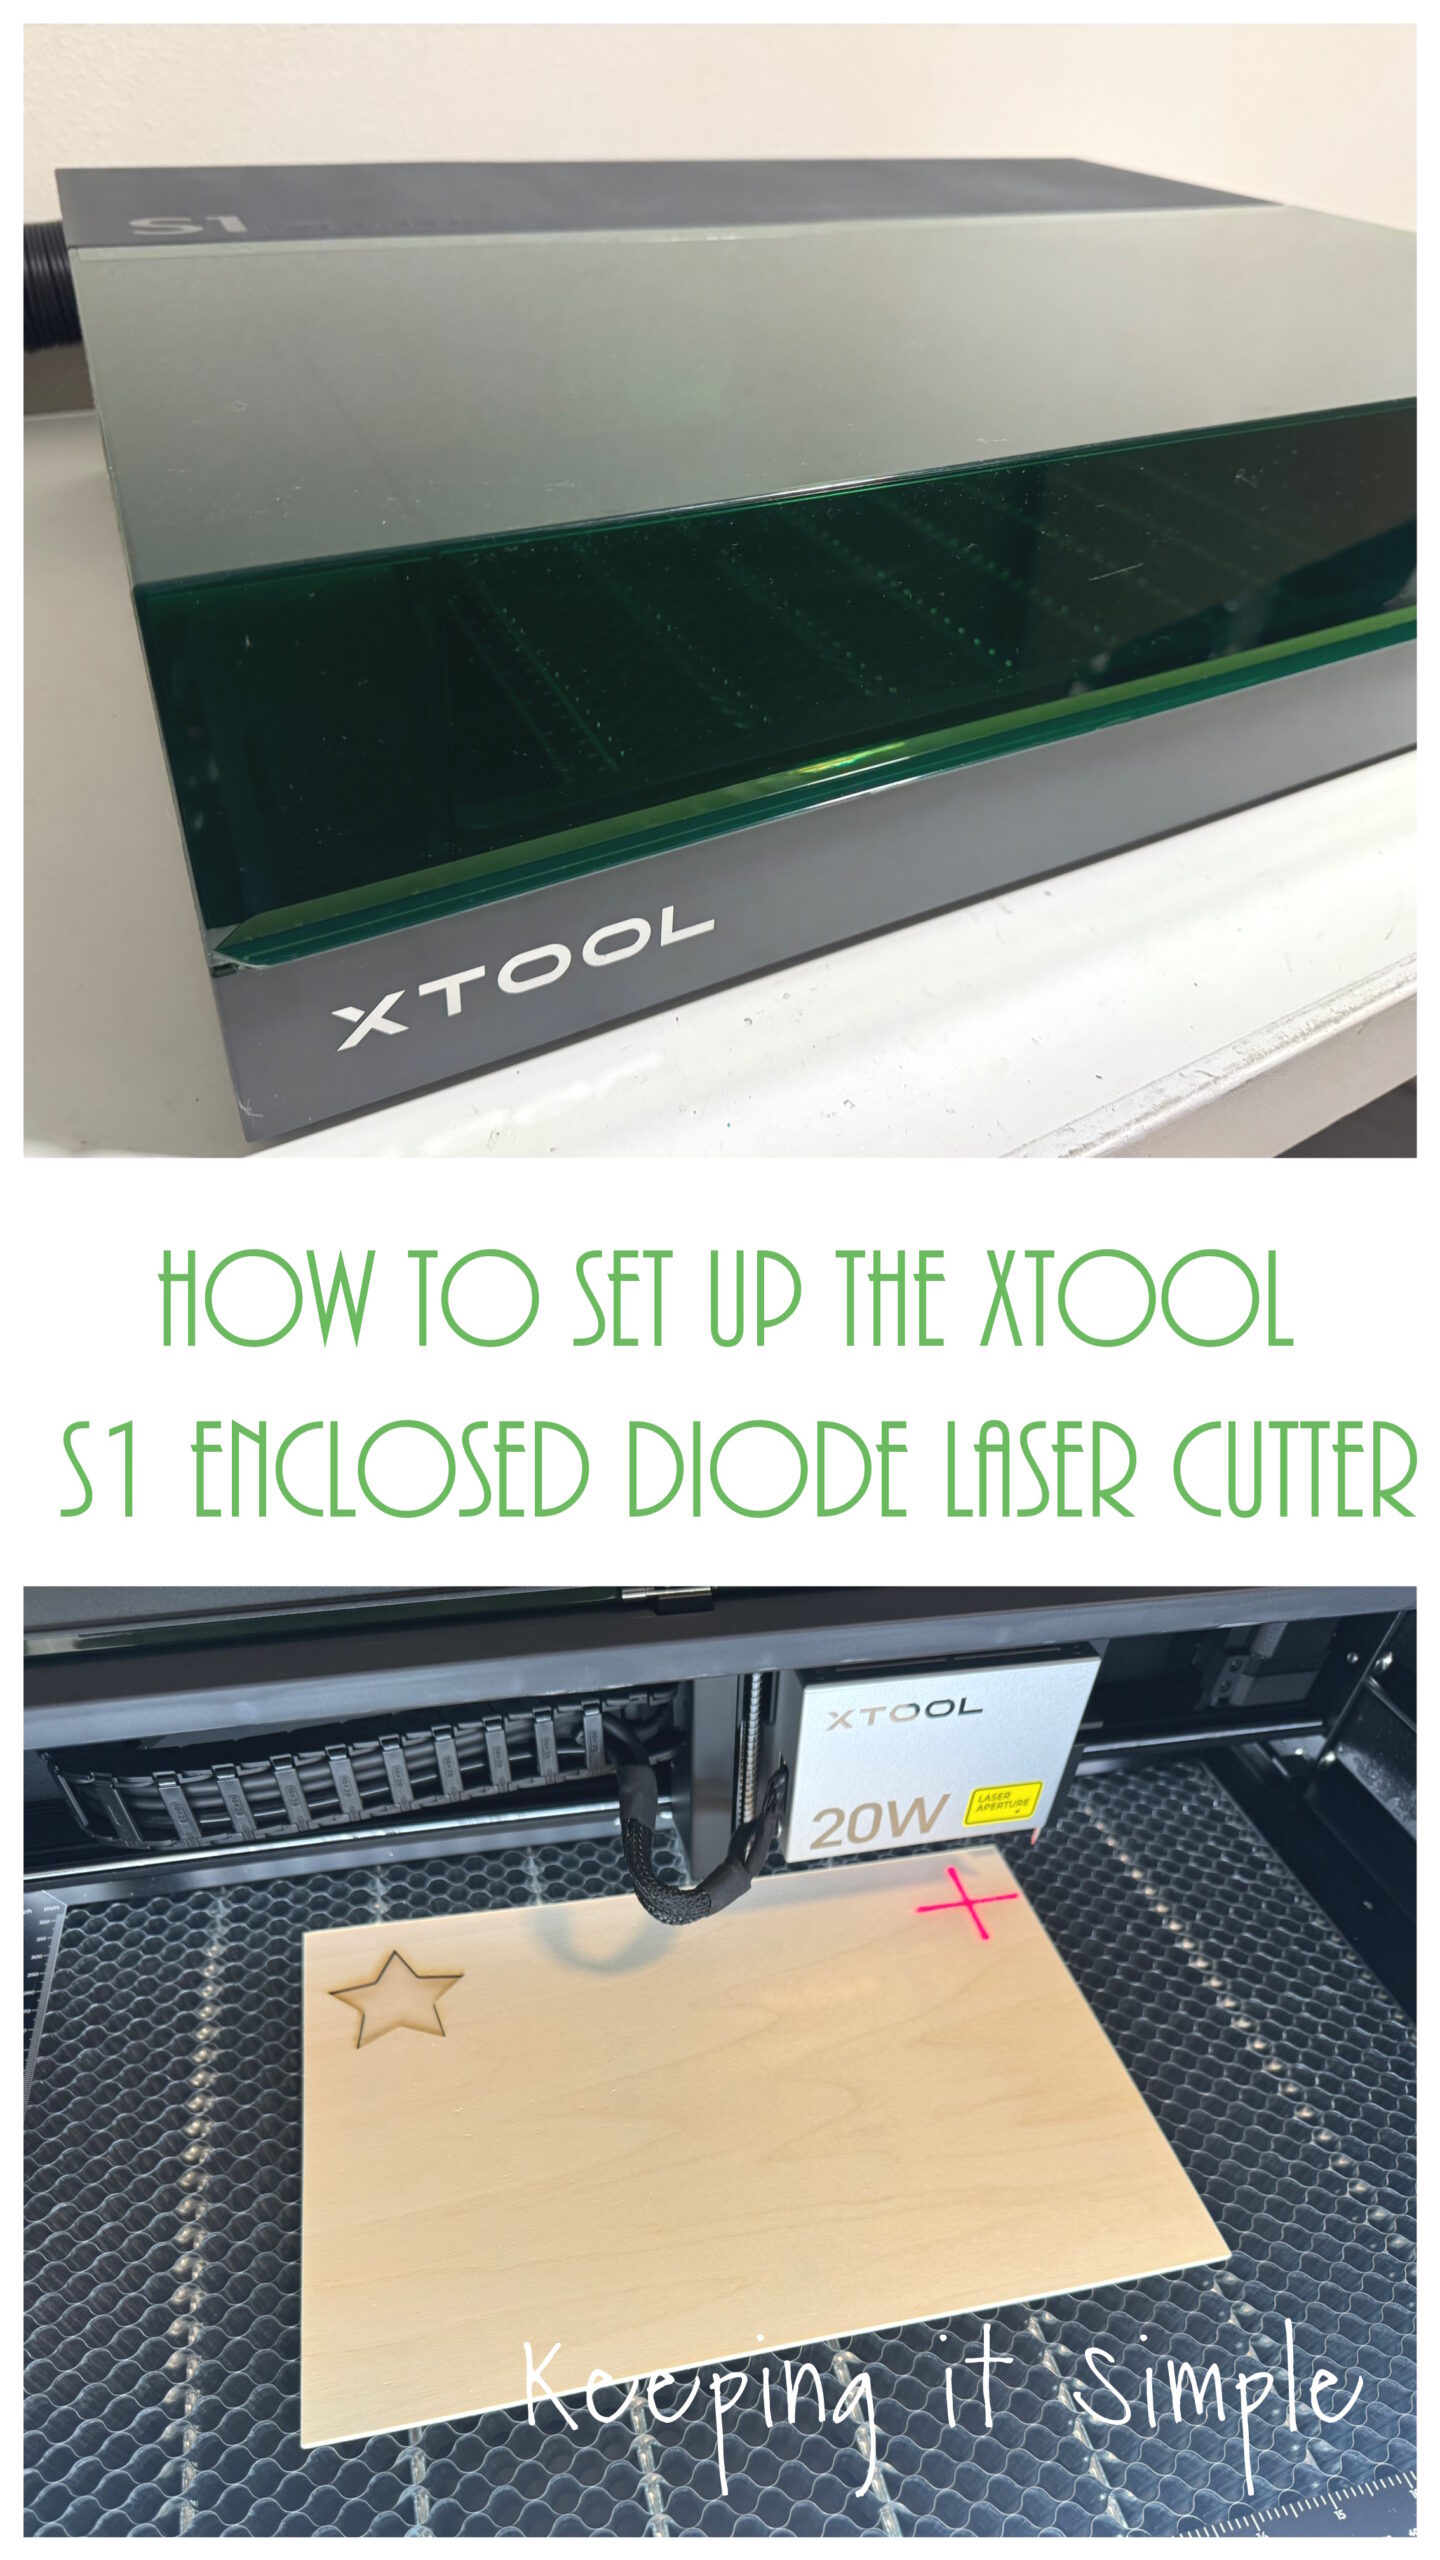 How to Set up the xTool S1 Enclosed Diode Laser Cutter - Keeping